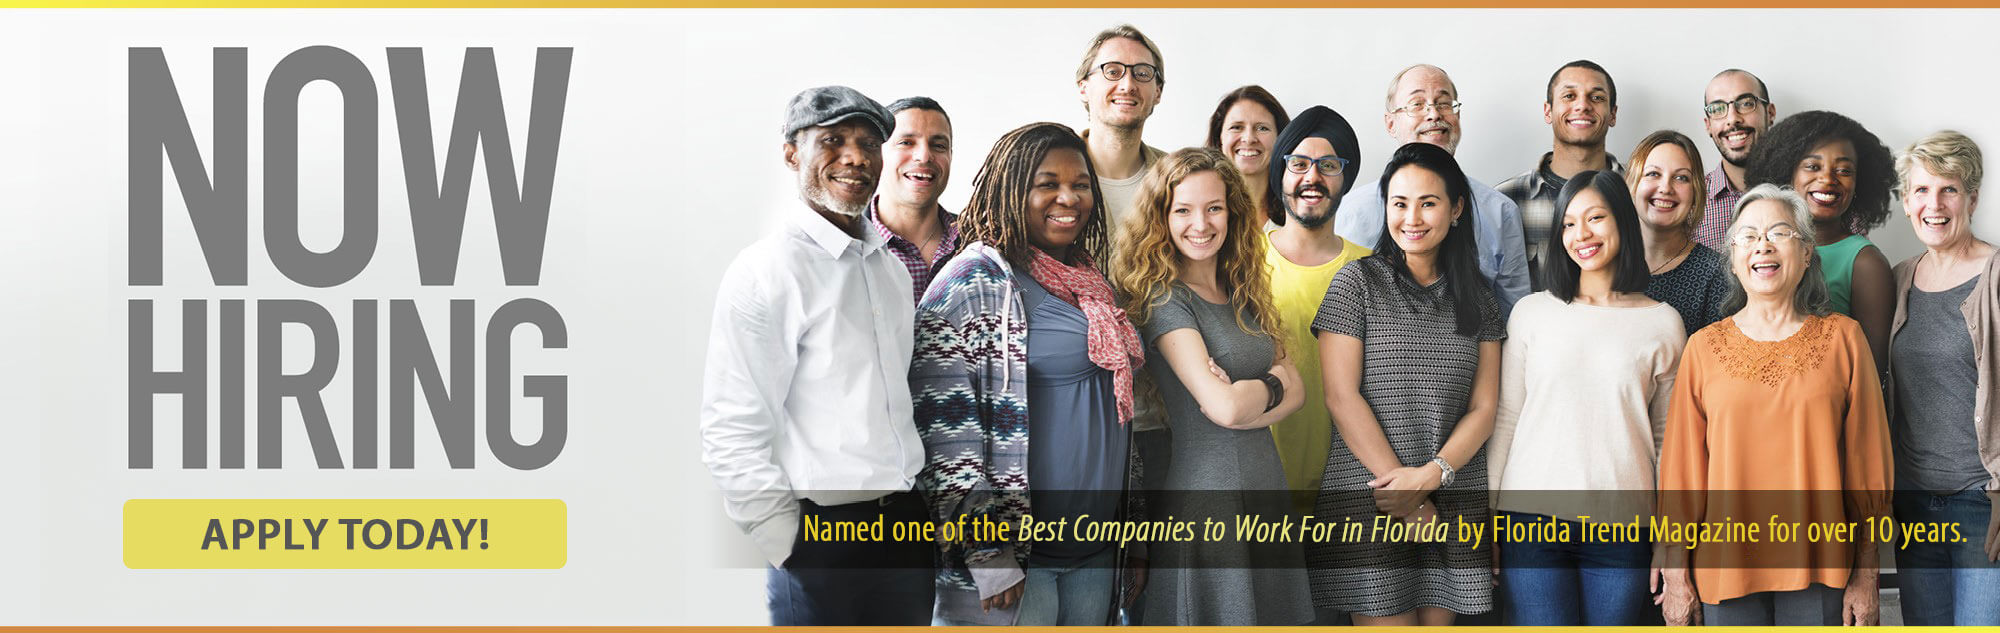 NOW HIRING - Named one of the Best Companies to Work For in Florida by Florida Trend Magazine for over 10 years.